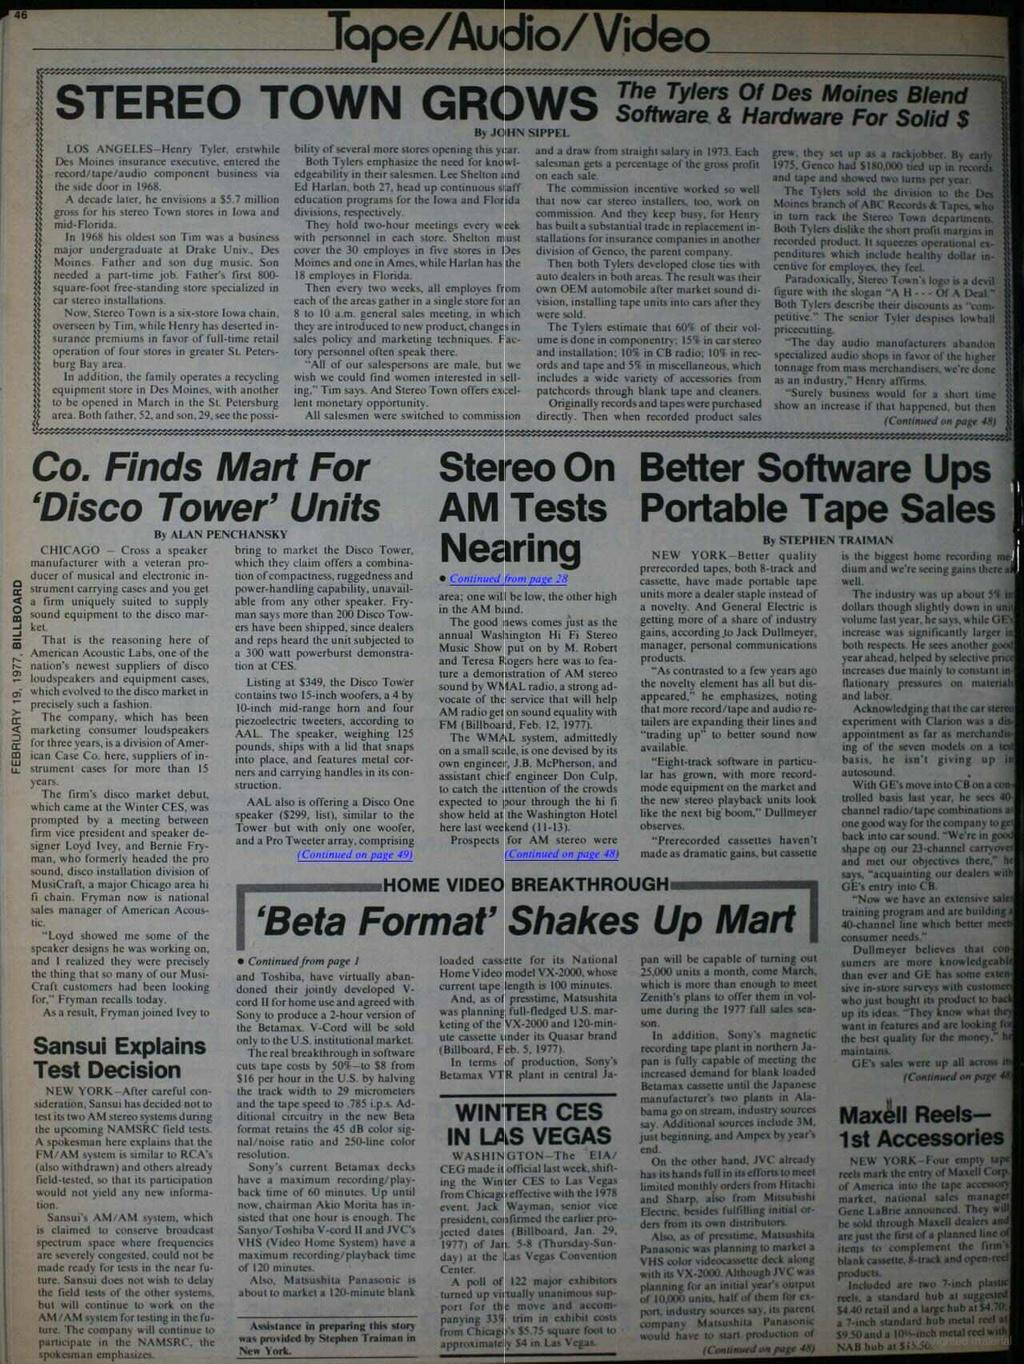 Tope /Audio /Video STEREO TOWN GROWS The Tylers Co LOS ANGELES -Henry Tyler. erstwhile Des Moines insurance executive- entered the record /tape /audio component business via Me side door in 1968.